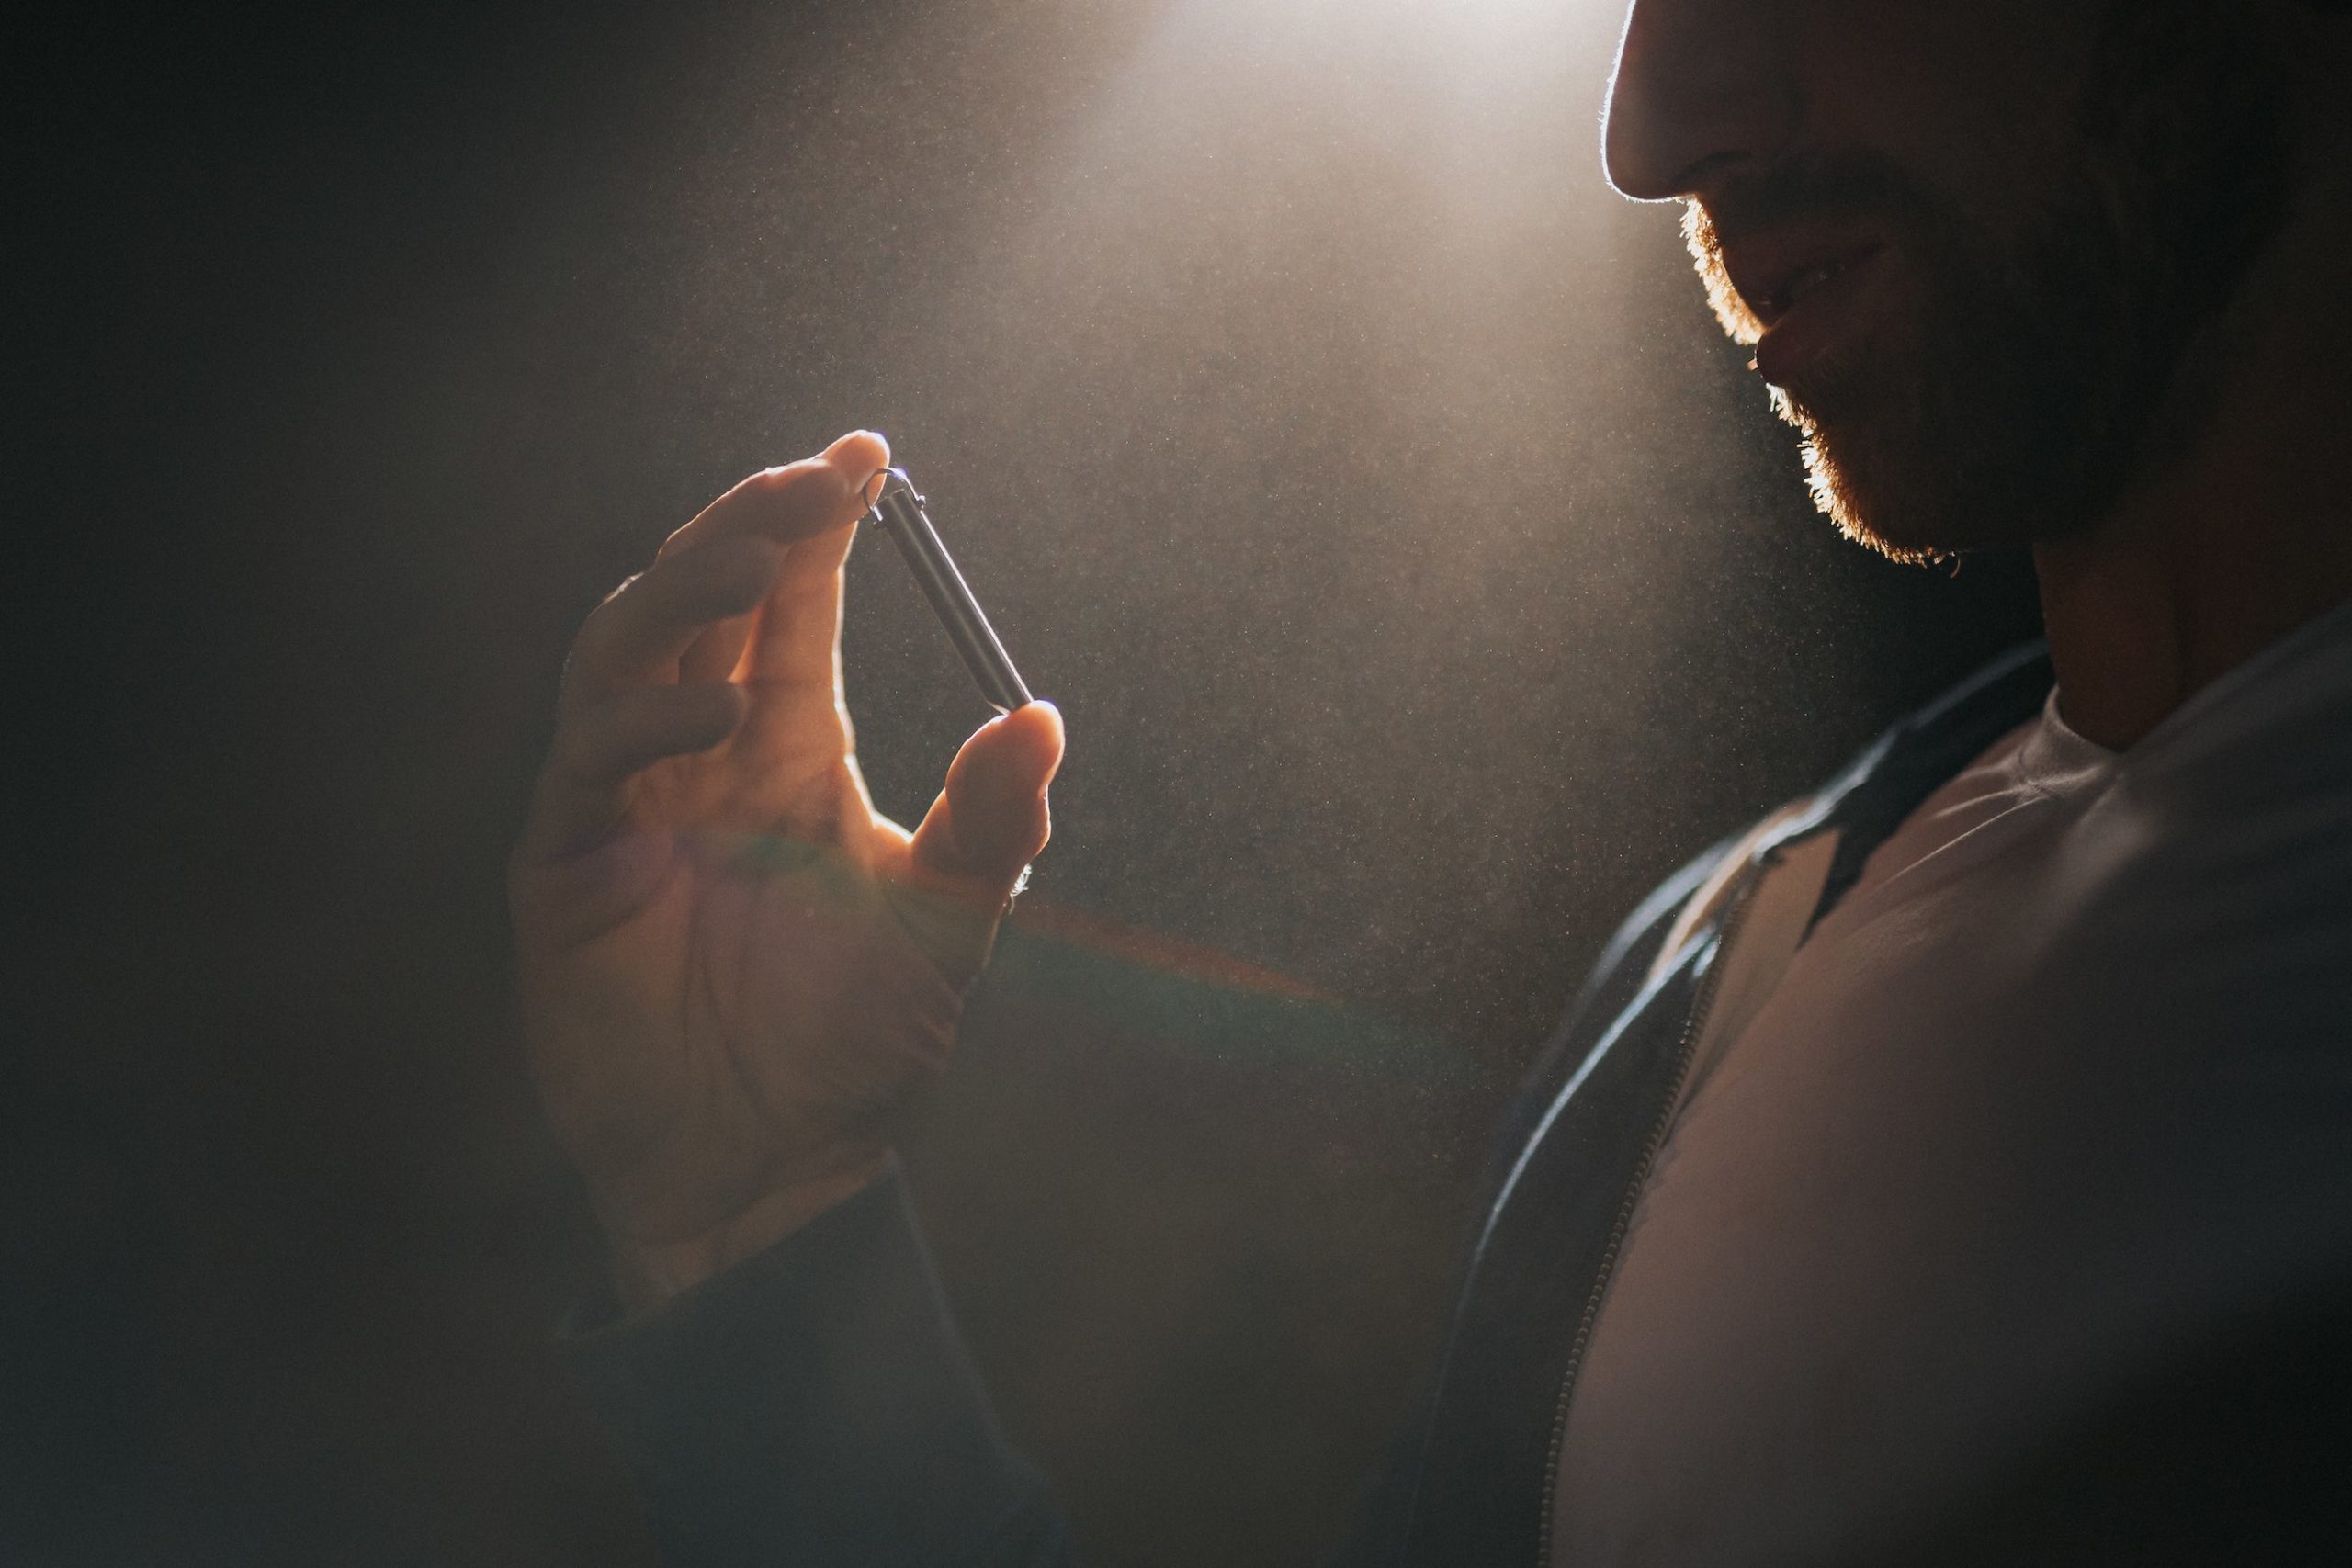 The Top 5 Proven Tips for Brand Building on Social Media Closeup of a bearded man in a dim light looking at a silver colored whistle he's holding in his hand